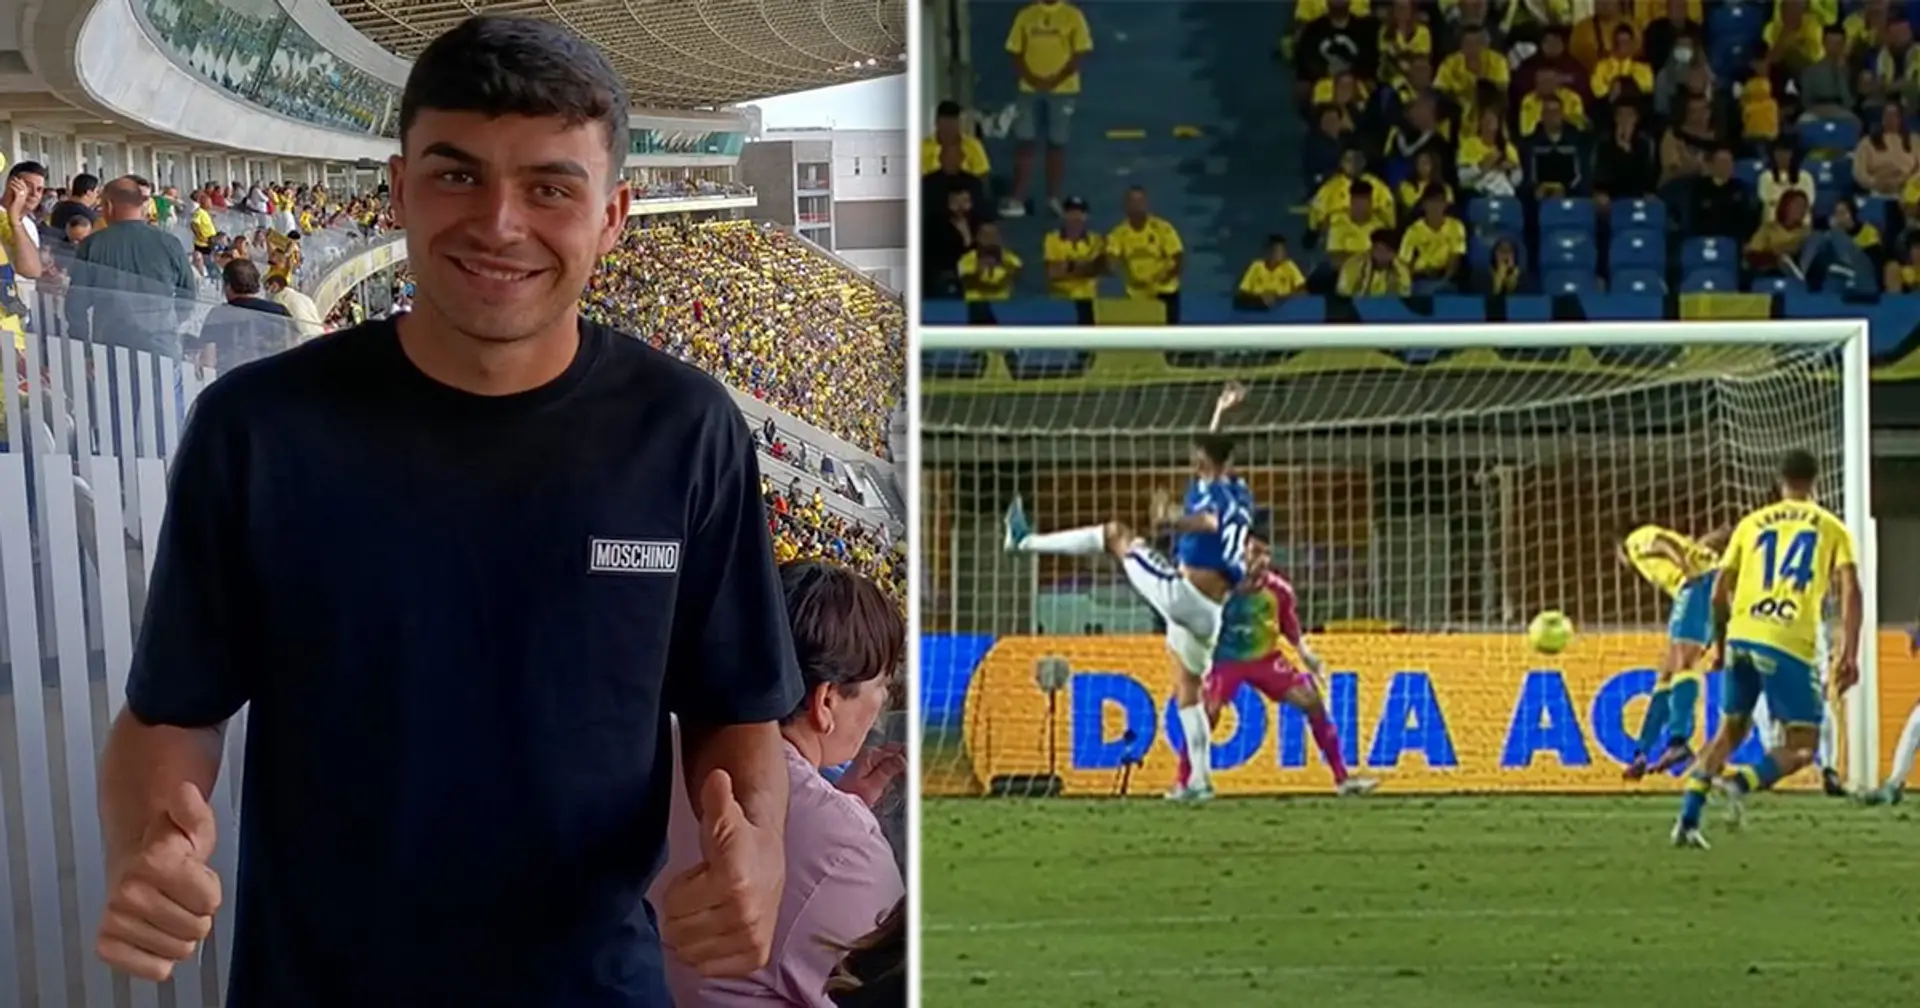 Why Pedri watching Las Palmas game live is so special explained